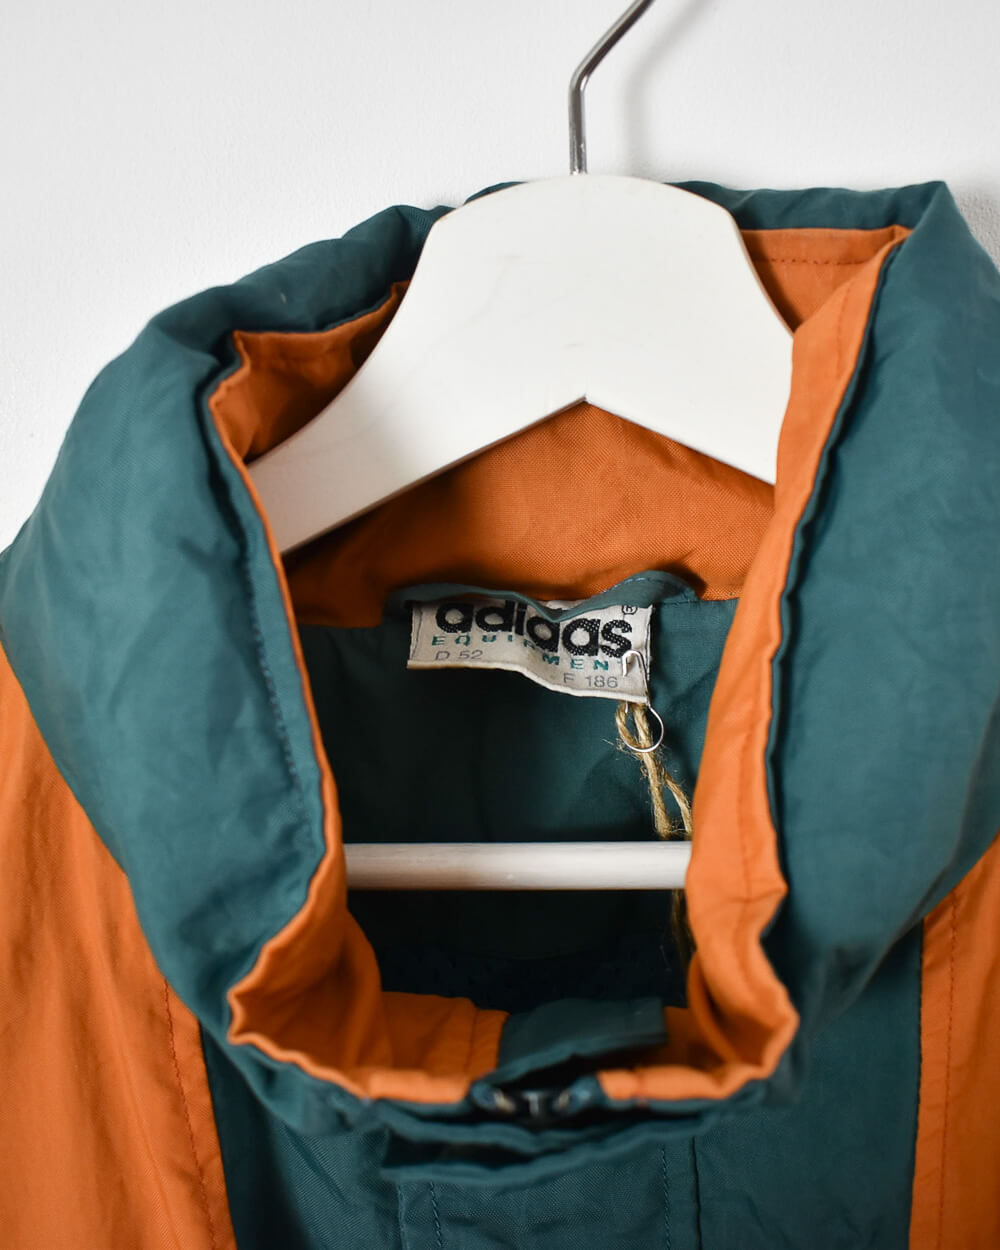 Adidas Equipment Winter Coat - Large - Domno Vintage 90s, 80s, 00s Retro and Vintage Clothing 